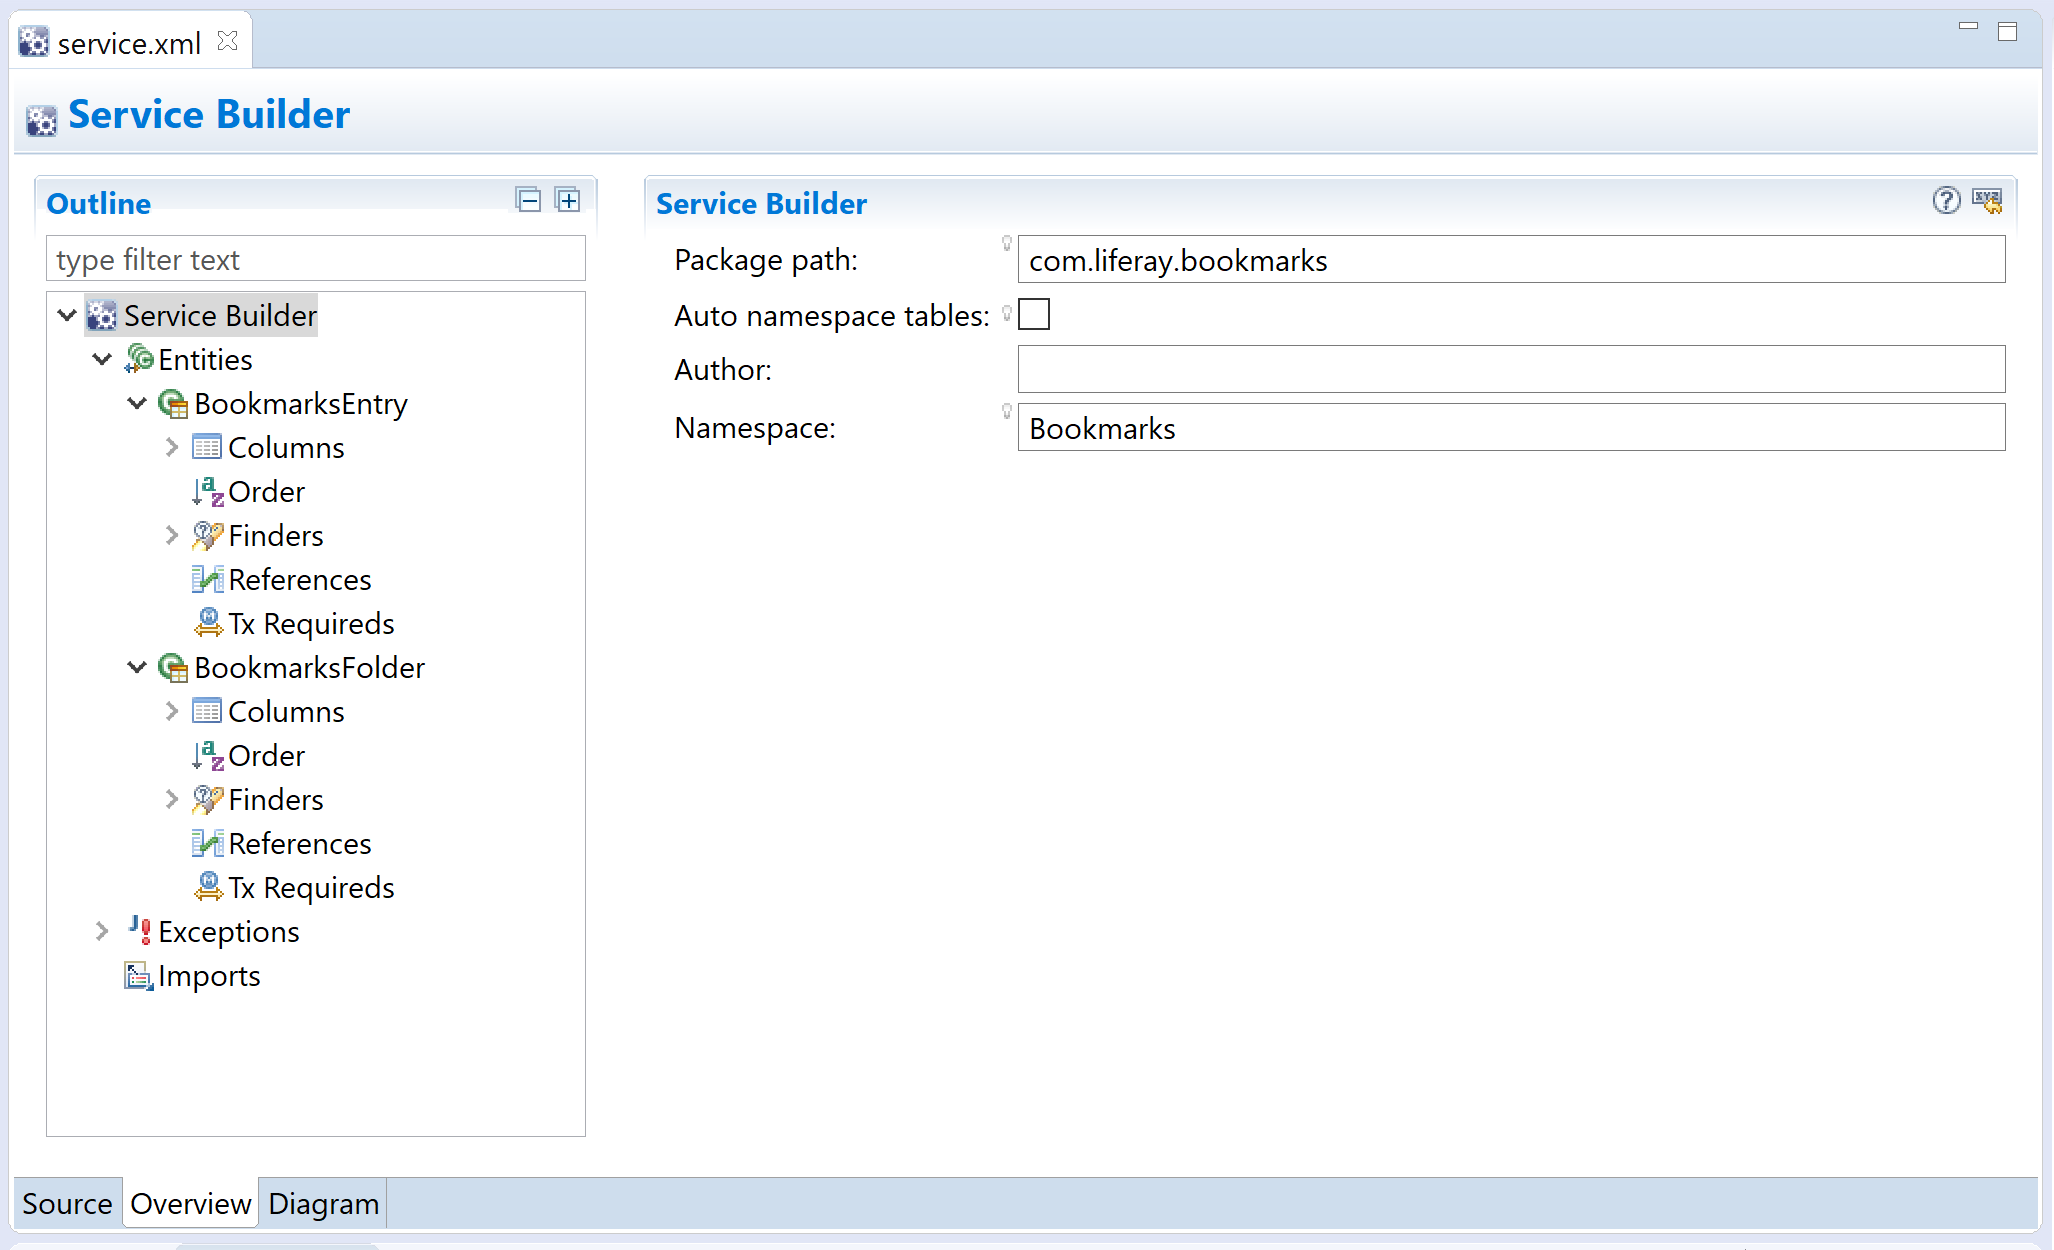 Figure 1: This is the Service Builder form from the Bookmarks applications service.xml.